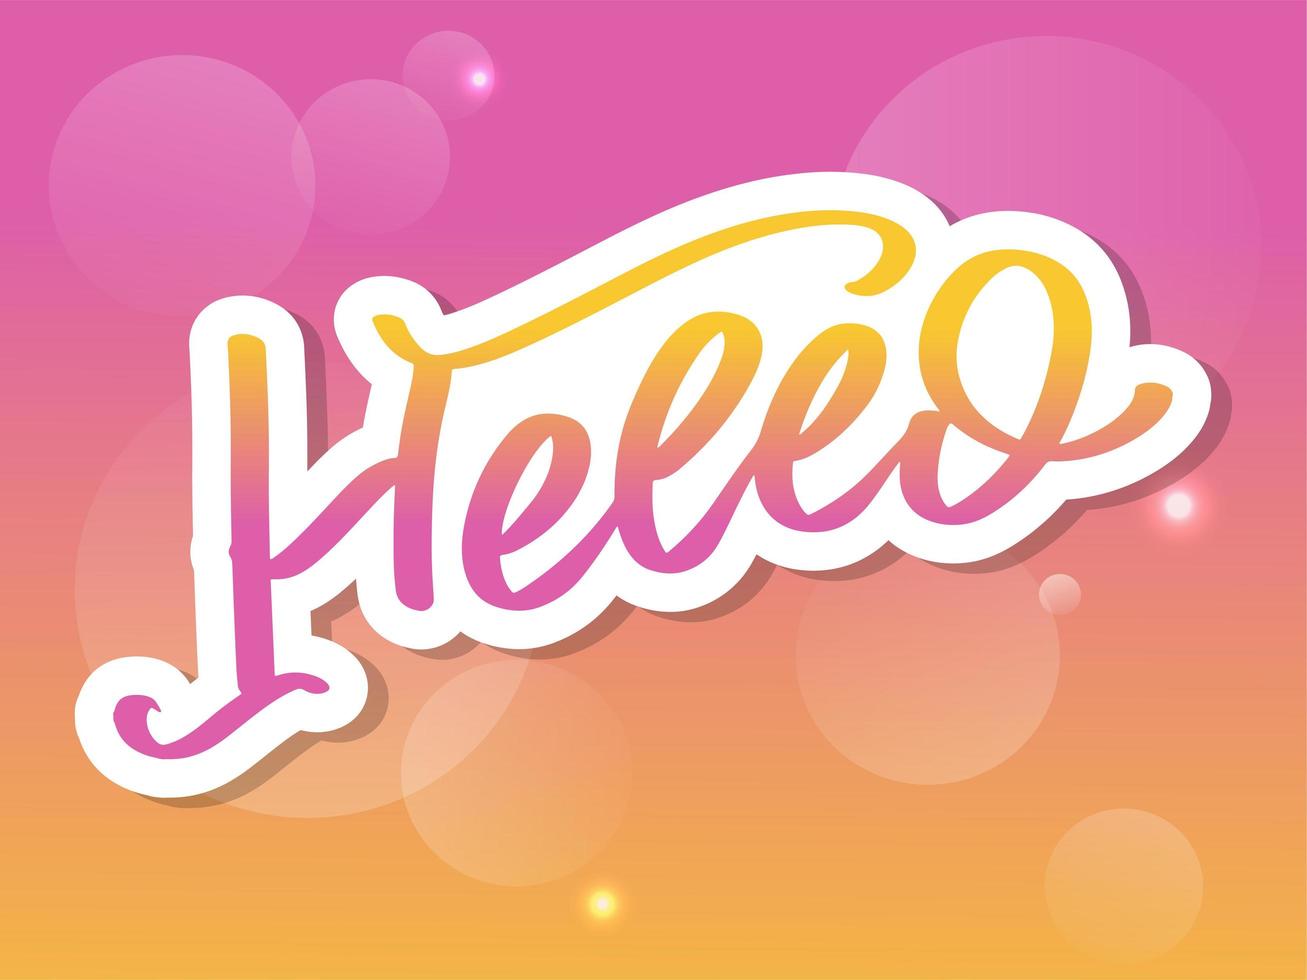 Hello in hand drawn style. Hello world. Lettering design concept. White background. Hand lettering typography. New year party. Hello quote message bubble. Hello symbol. vector